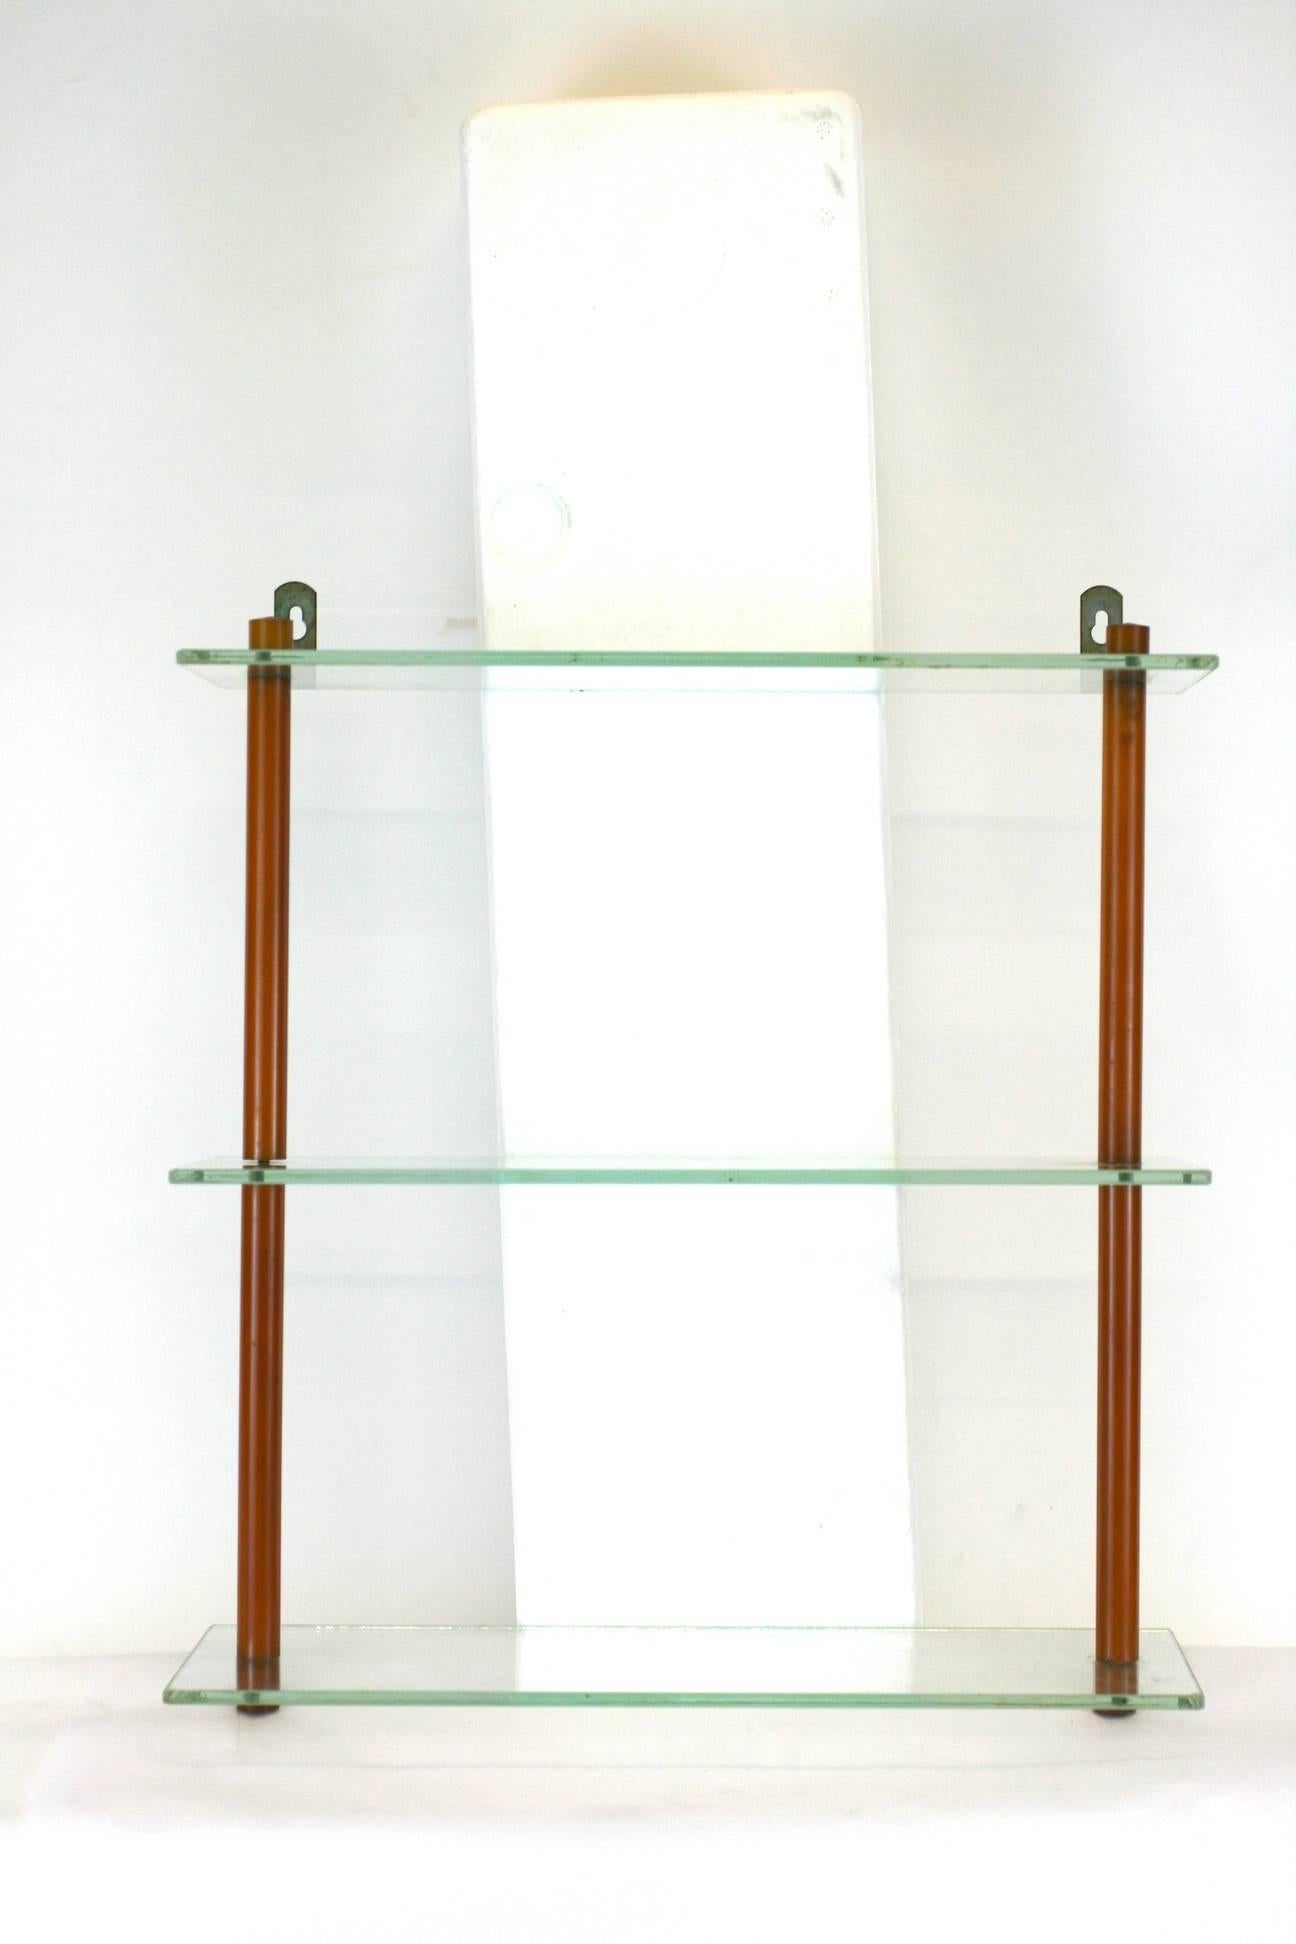 Art Deco Bakelite Shelf, perfect for your display of bakelite barware and objects! 
Glass shelves with caramel Bakelite clad metal rod supports.  1930's USA. 
14" wide x 5" deep, 16" high. 
Excellent condition. 